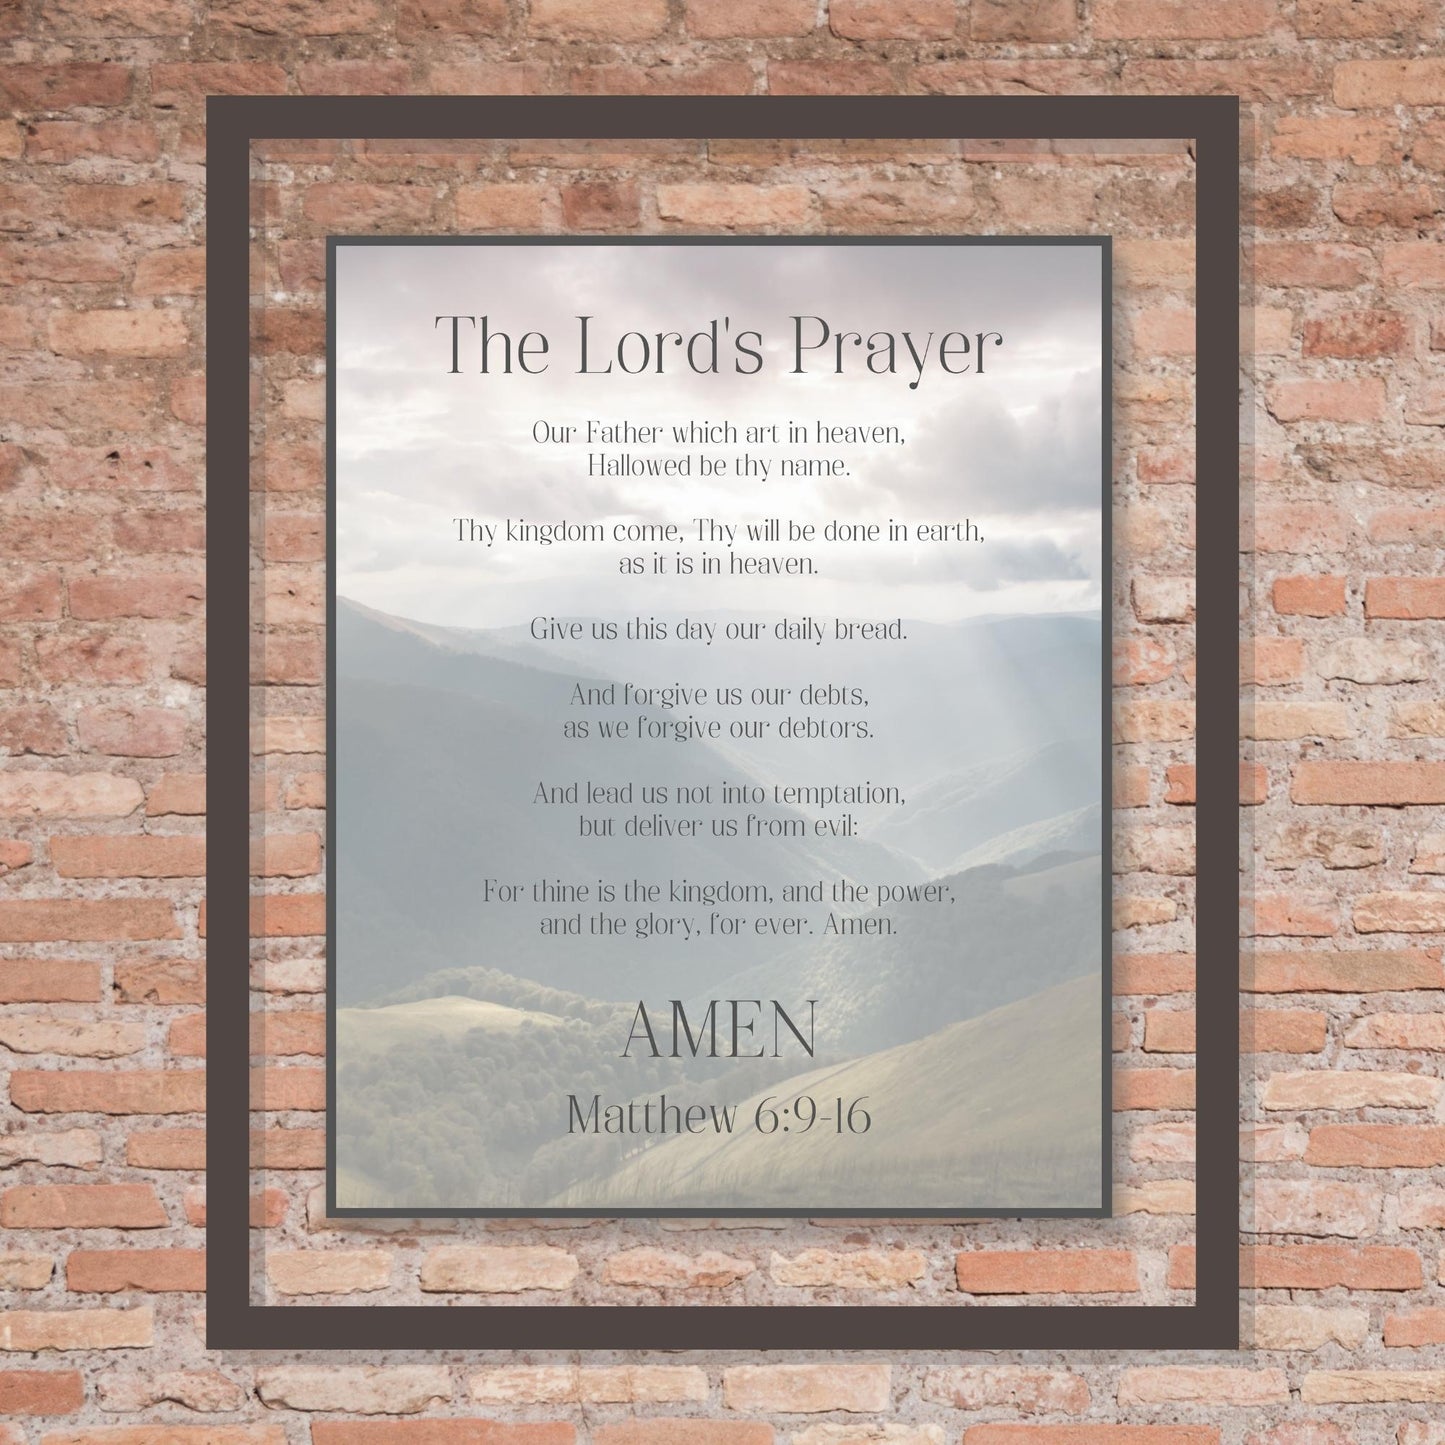 Inspirational Bible Verse Wall Art - The Lord's Prayer, Our Father (Matthew 6:9-16) Christian Wall Poster (16x20) | Shown in modern framed glass floating picture frame on old world brick wall | oak7west.com